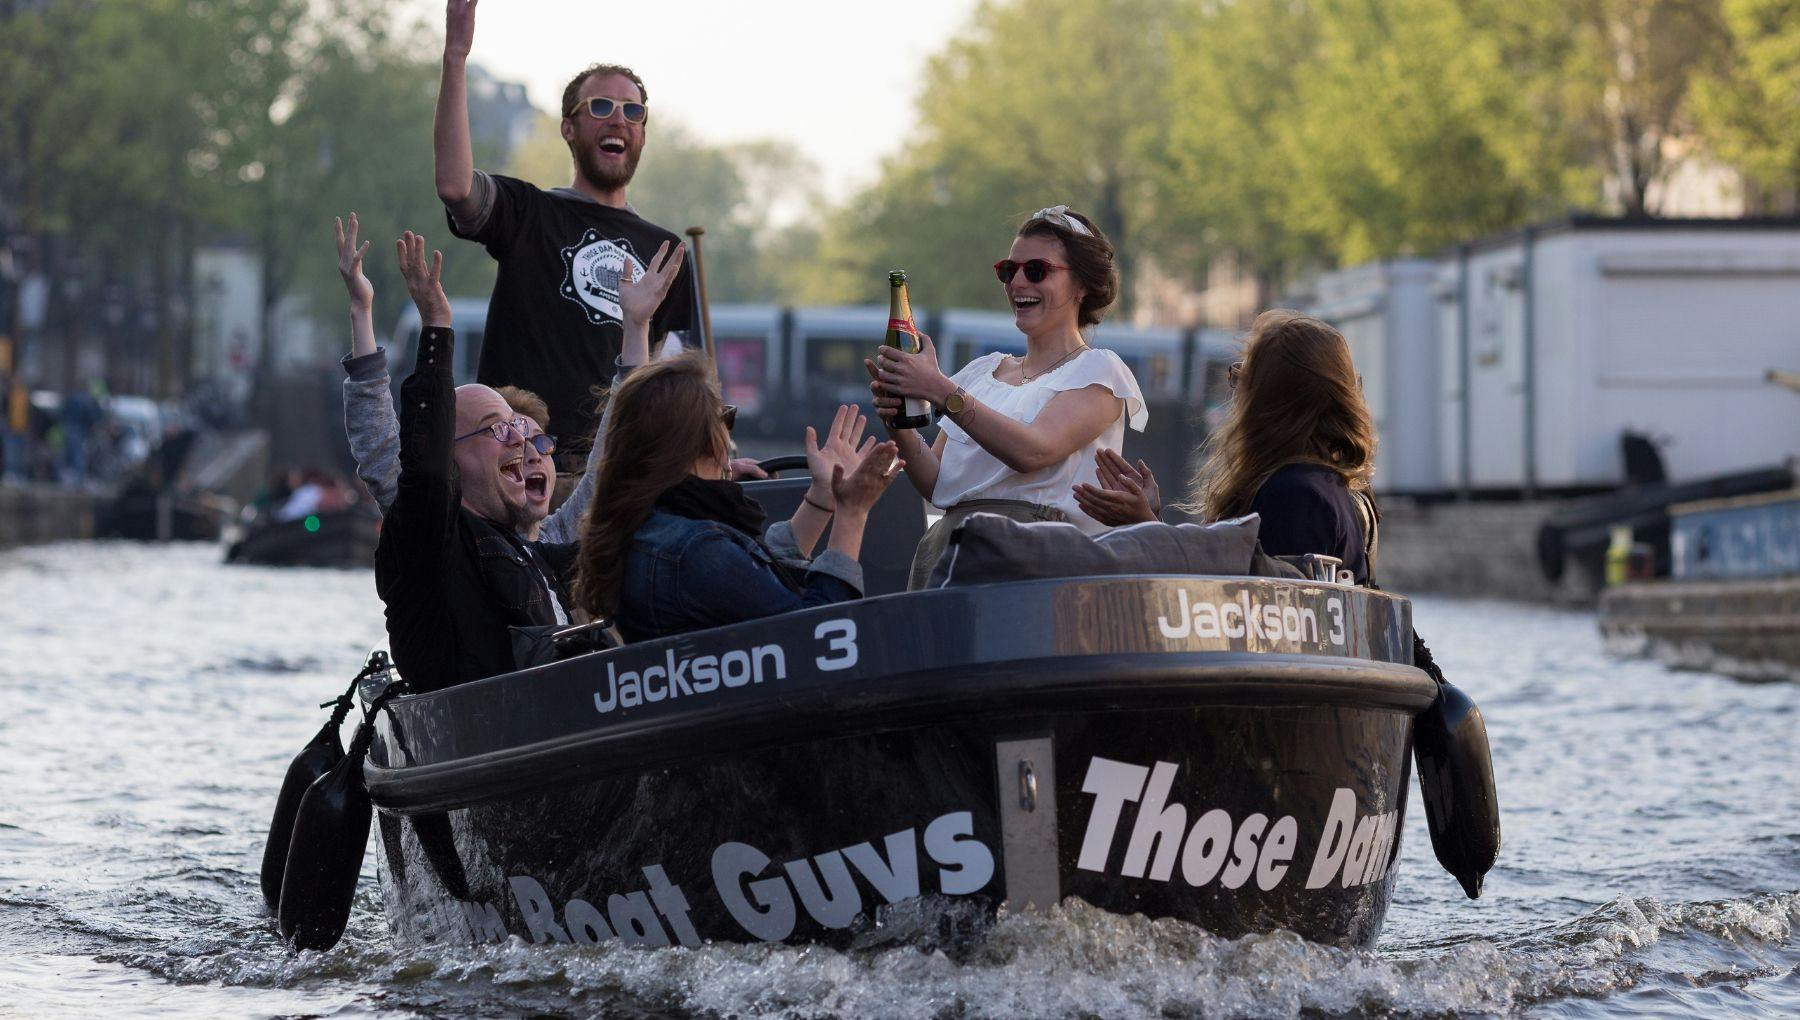 Those Dam Boat Guys people enjoying champagne on a boat